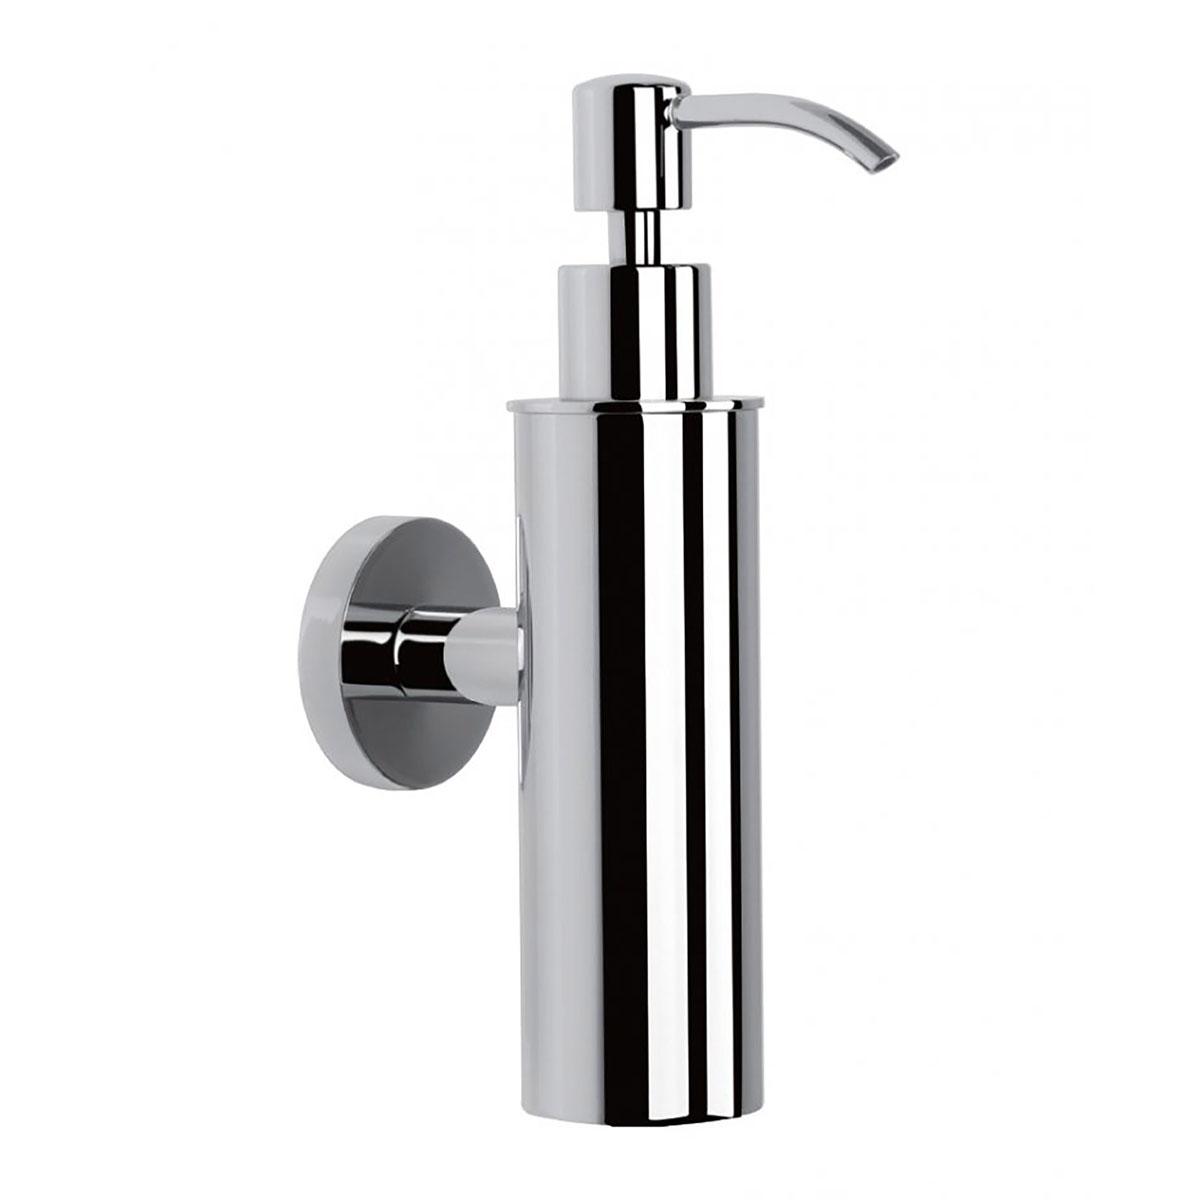 An image of Casa Bano Delta Round Liquid Soap Dispenser Stainless Steel Pump - Chrome